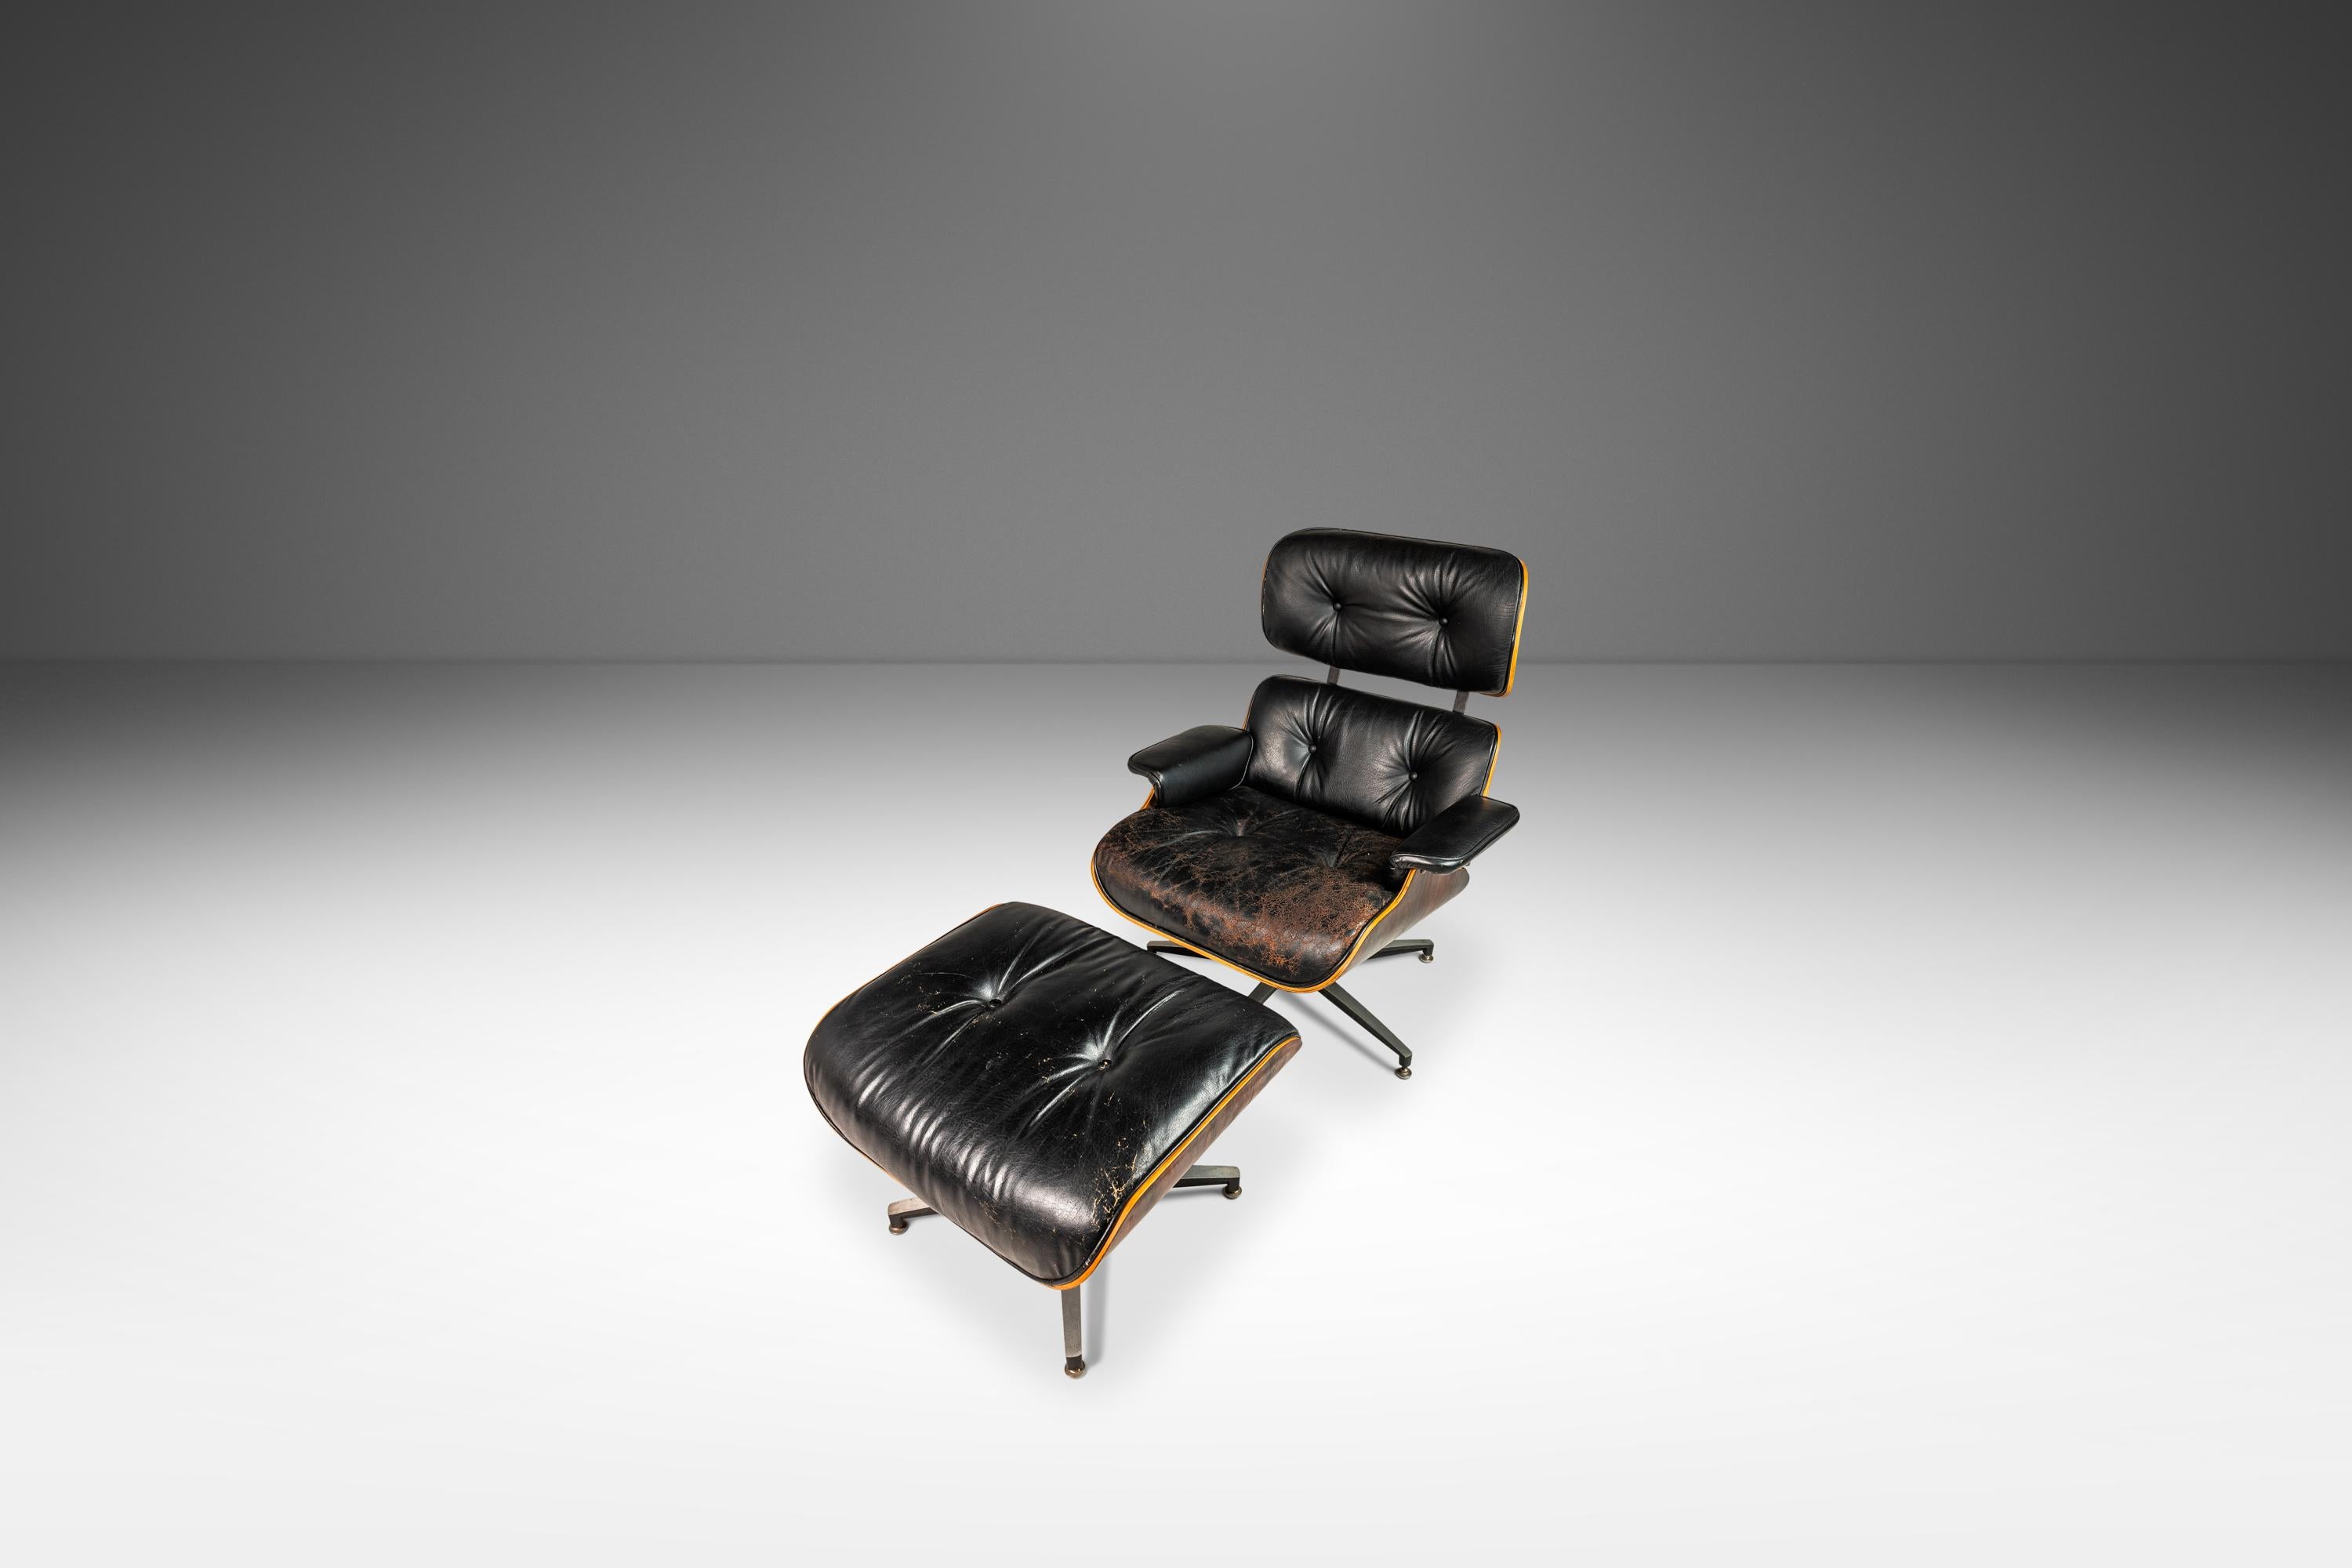 Introducing a gorgeous, vintage Mid-Century Modern lounge chair and ottoman set clearly modeled after the iconic 670 Lounge and Ottoman designed by Charles and Ray Eames for Herman Miller. Featuring bentwood 'shells' made from Brazilian rosewood